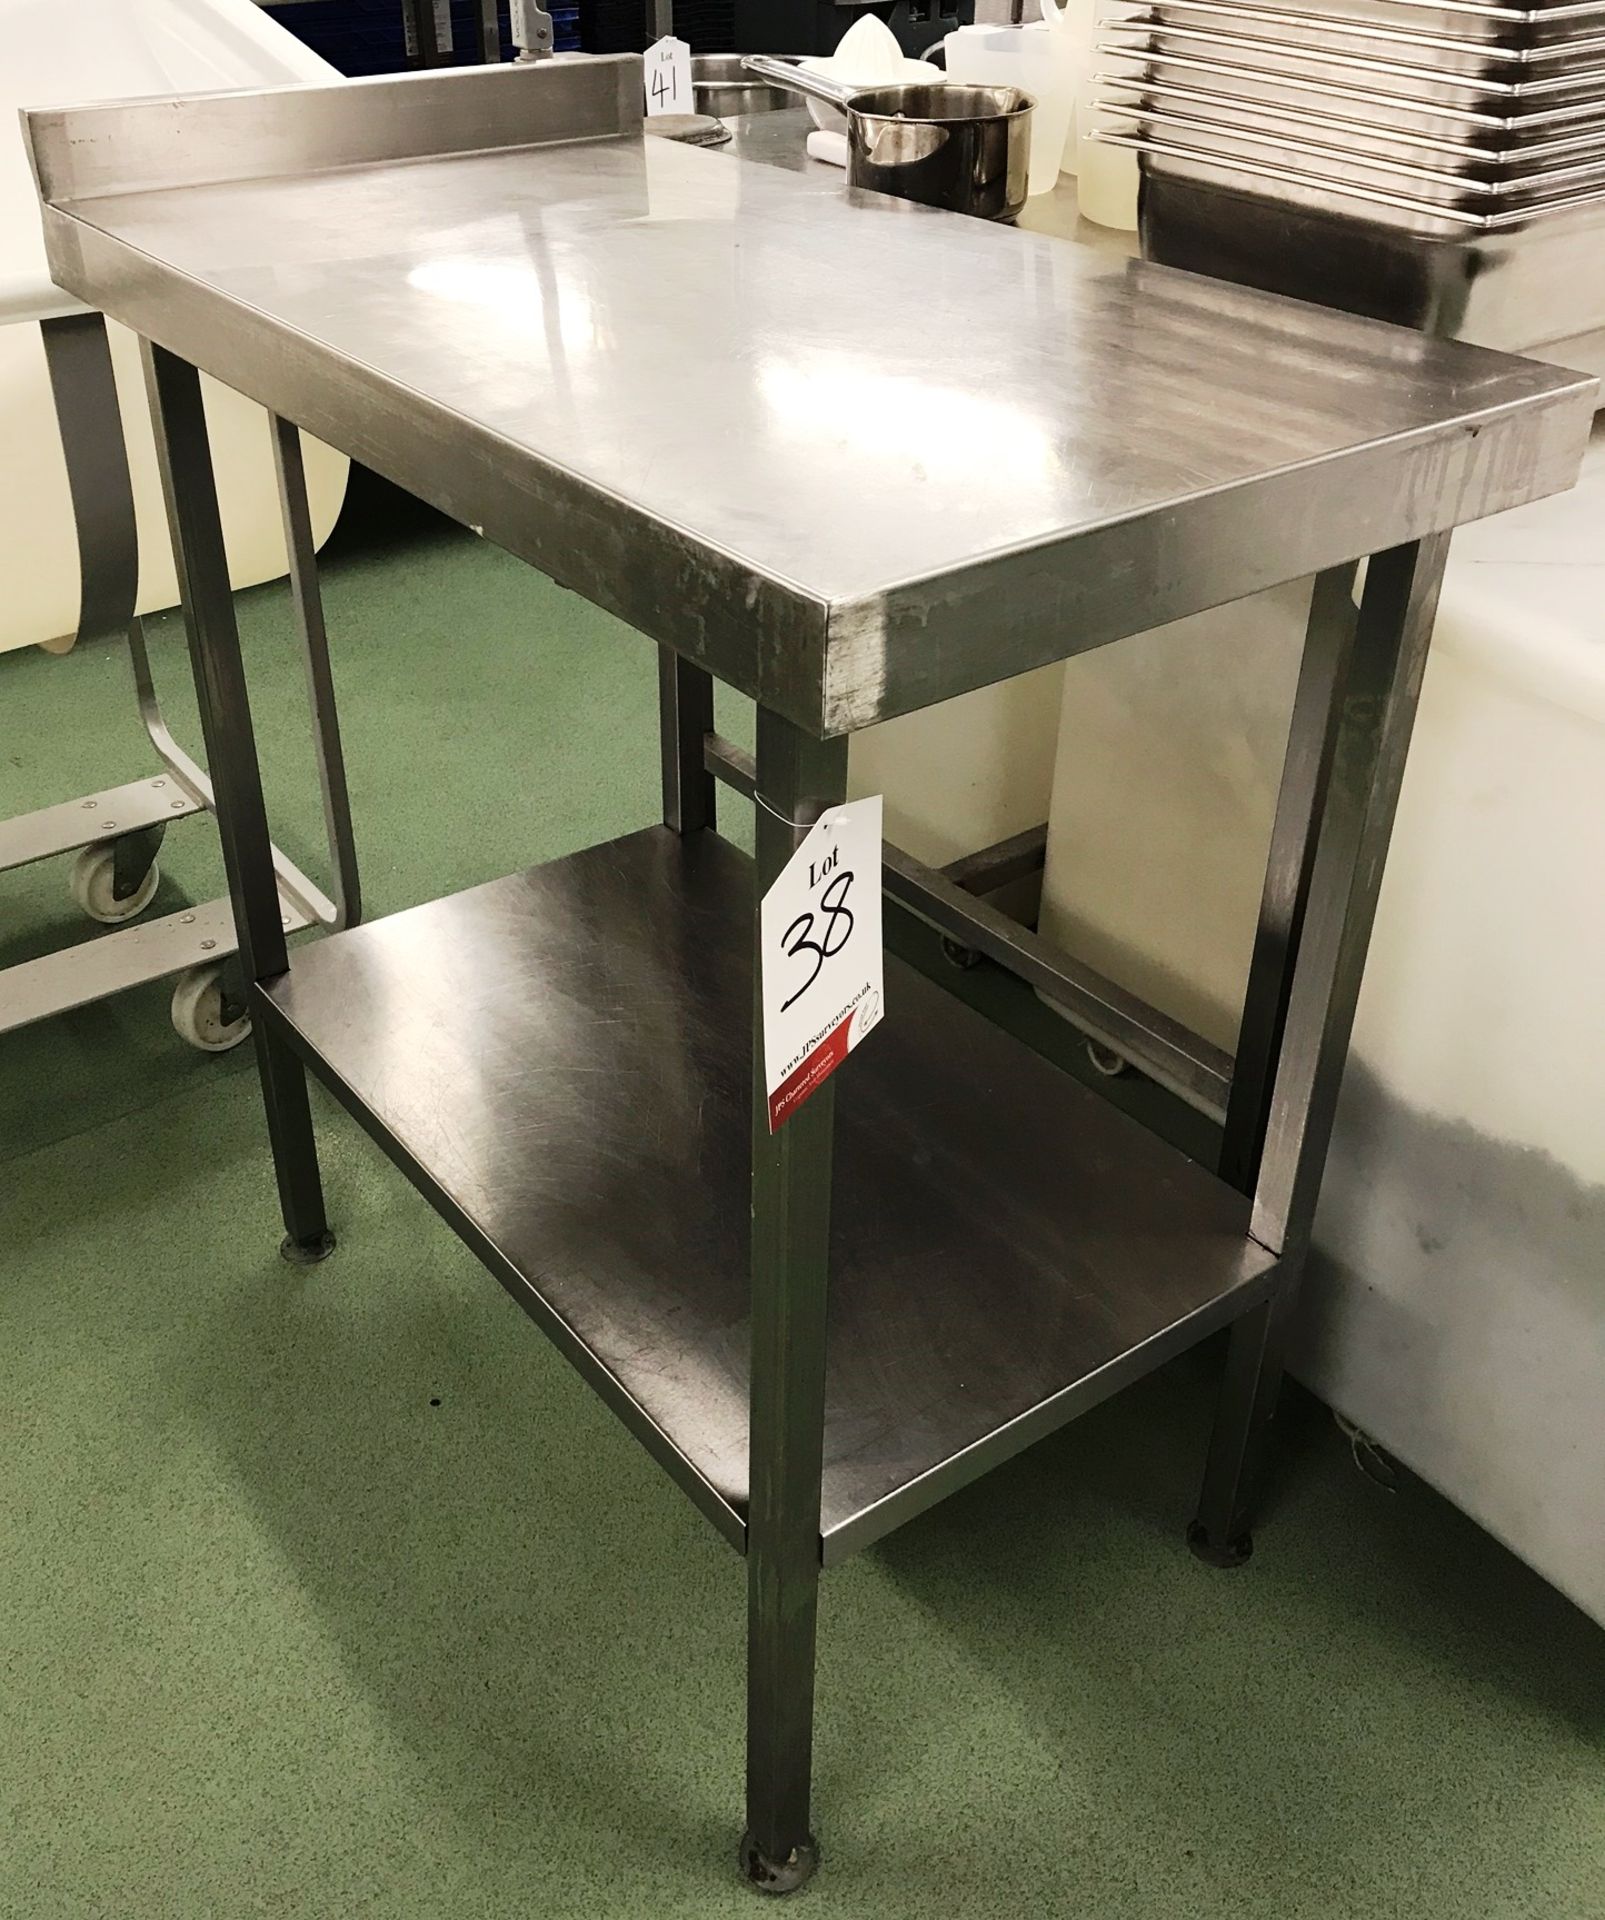 Stainless Steel Preparation Table w/ Undershelf & Upstand - 500mm Length